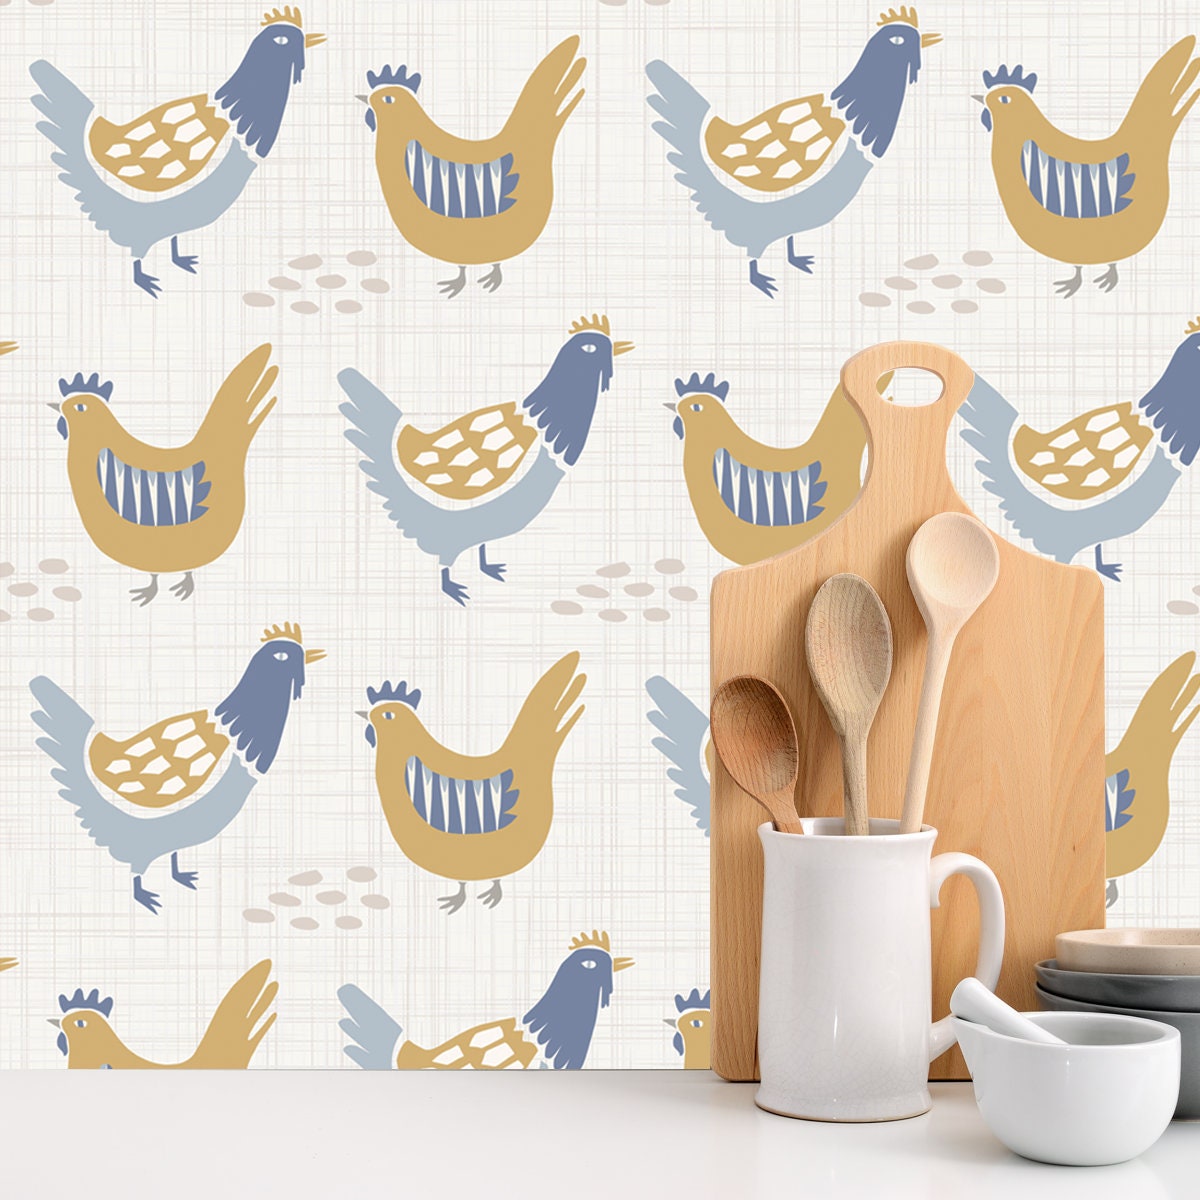 French Farmhouse Chicken Hen Pattern. Provence Linen Shabby Chic Style. Hand Drawn Rustic Texture Background Wallpaper Kitchen Mural